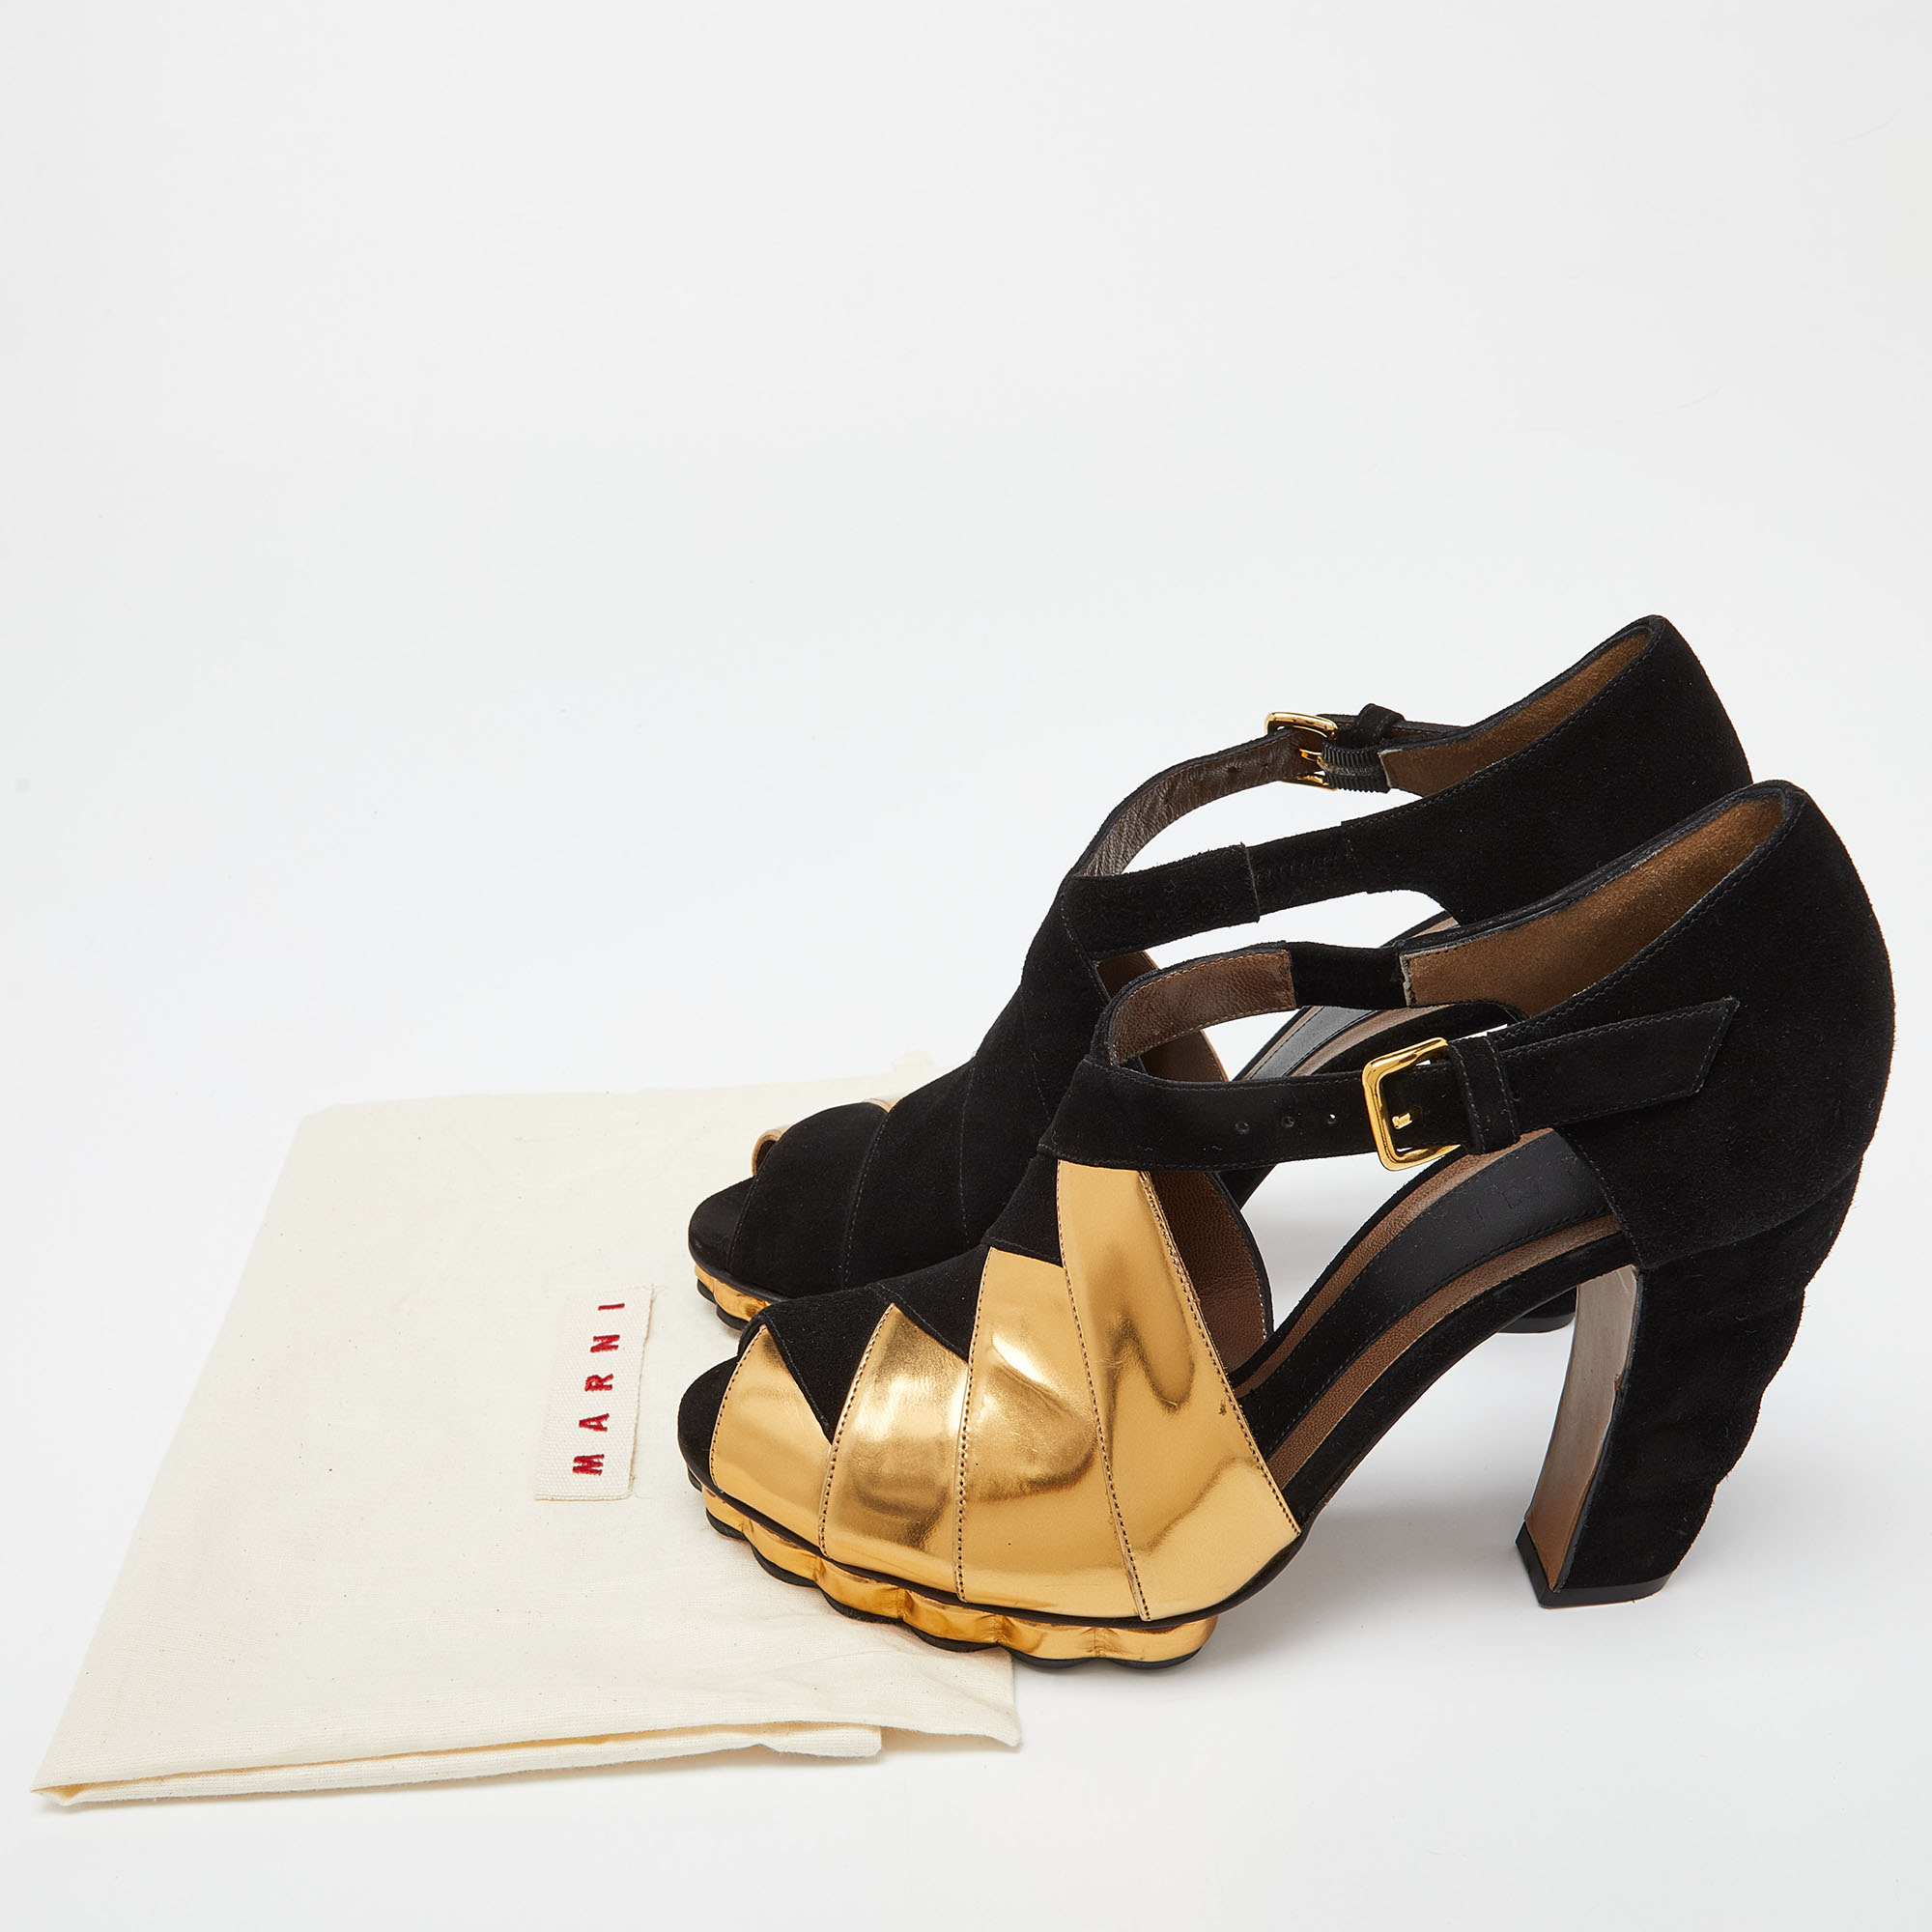 Marni Black/Gold Suede And Leather Peep Toe Platform Sandals Size 40.5